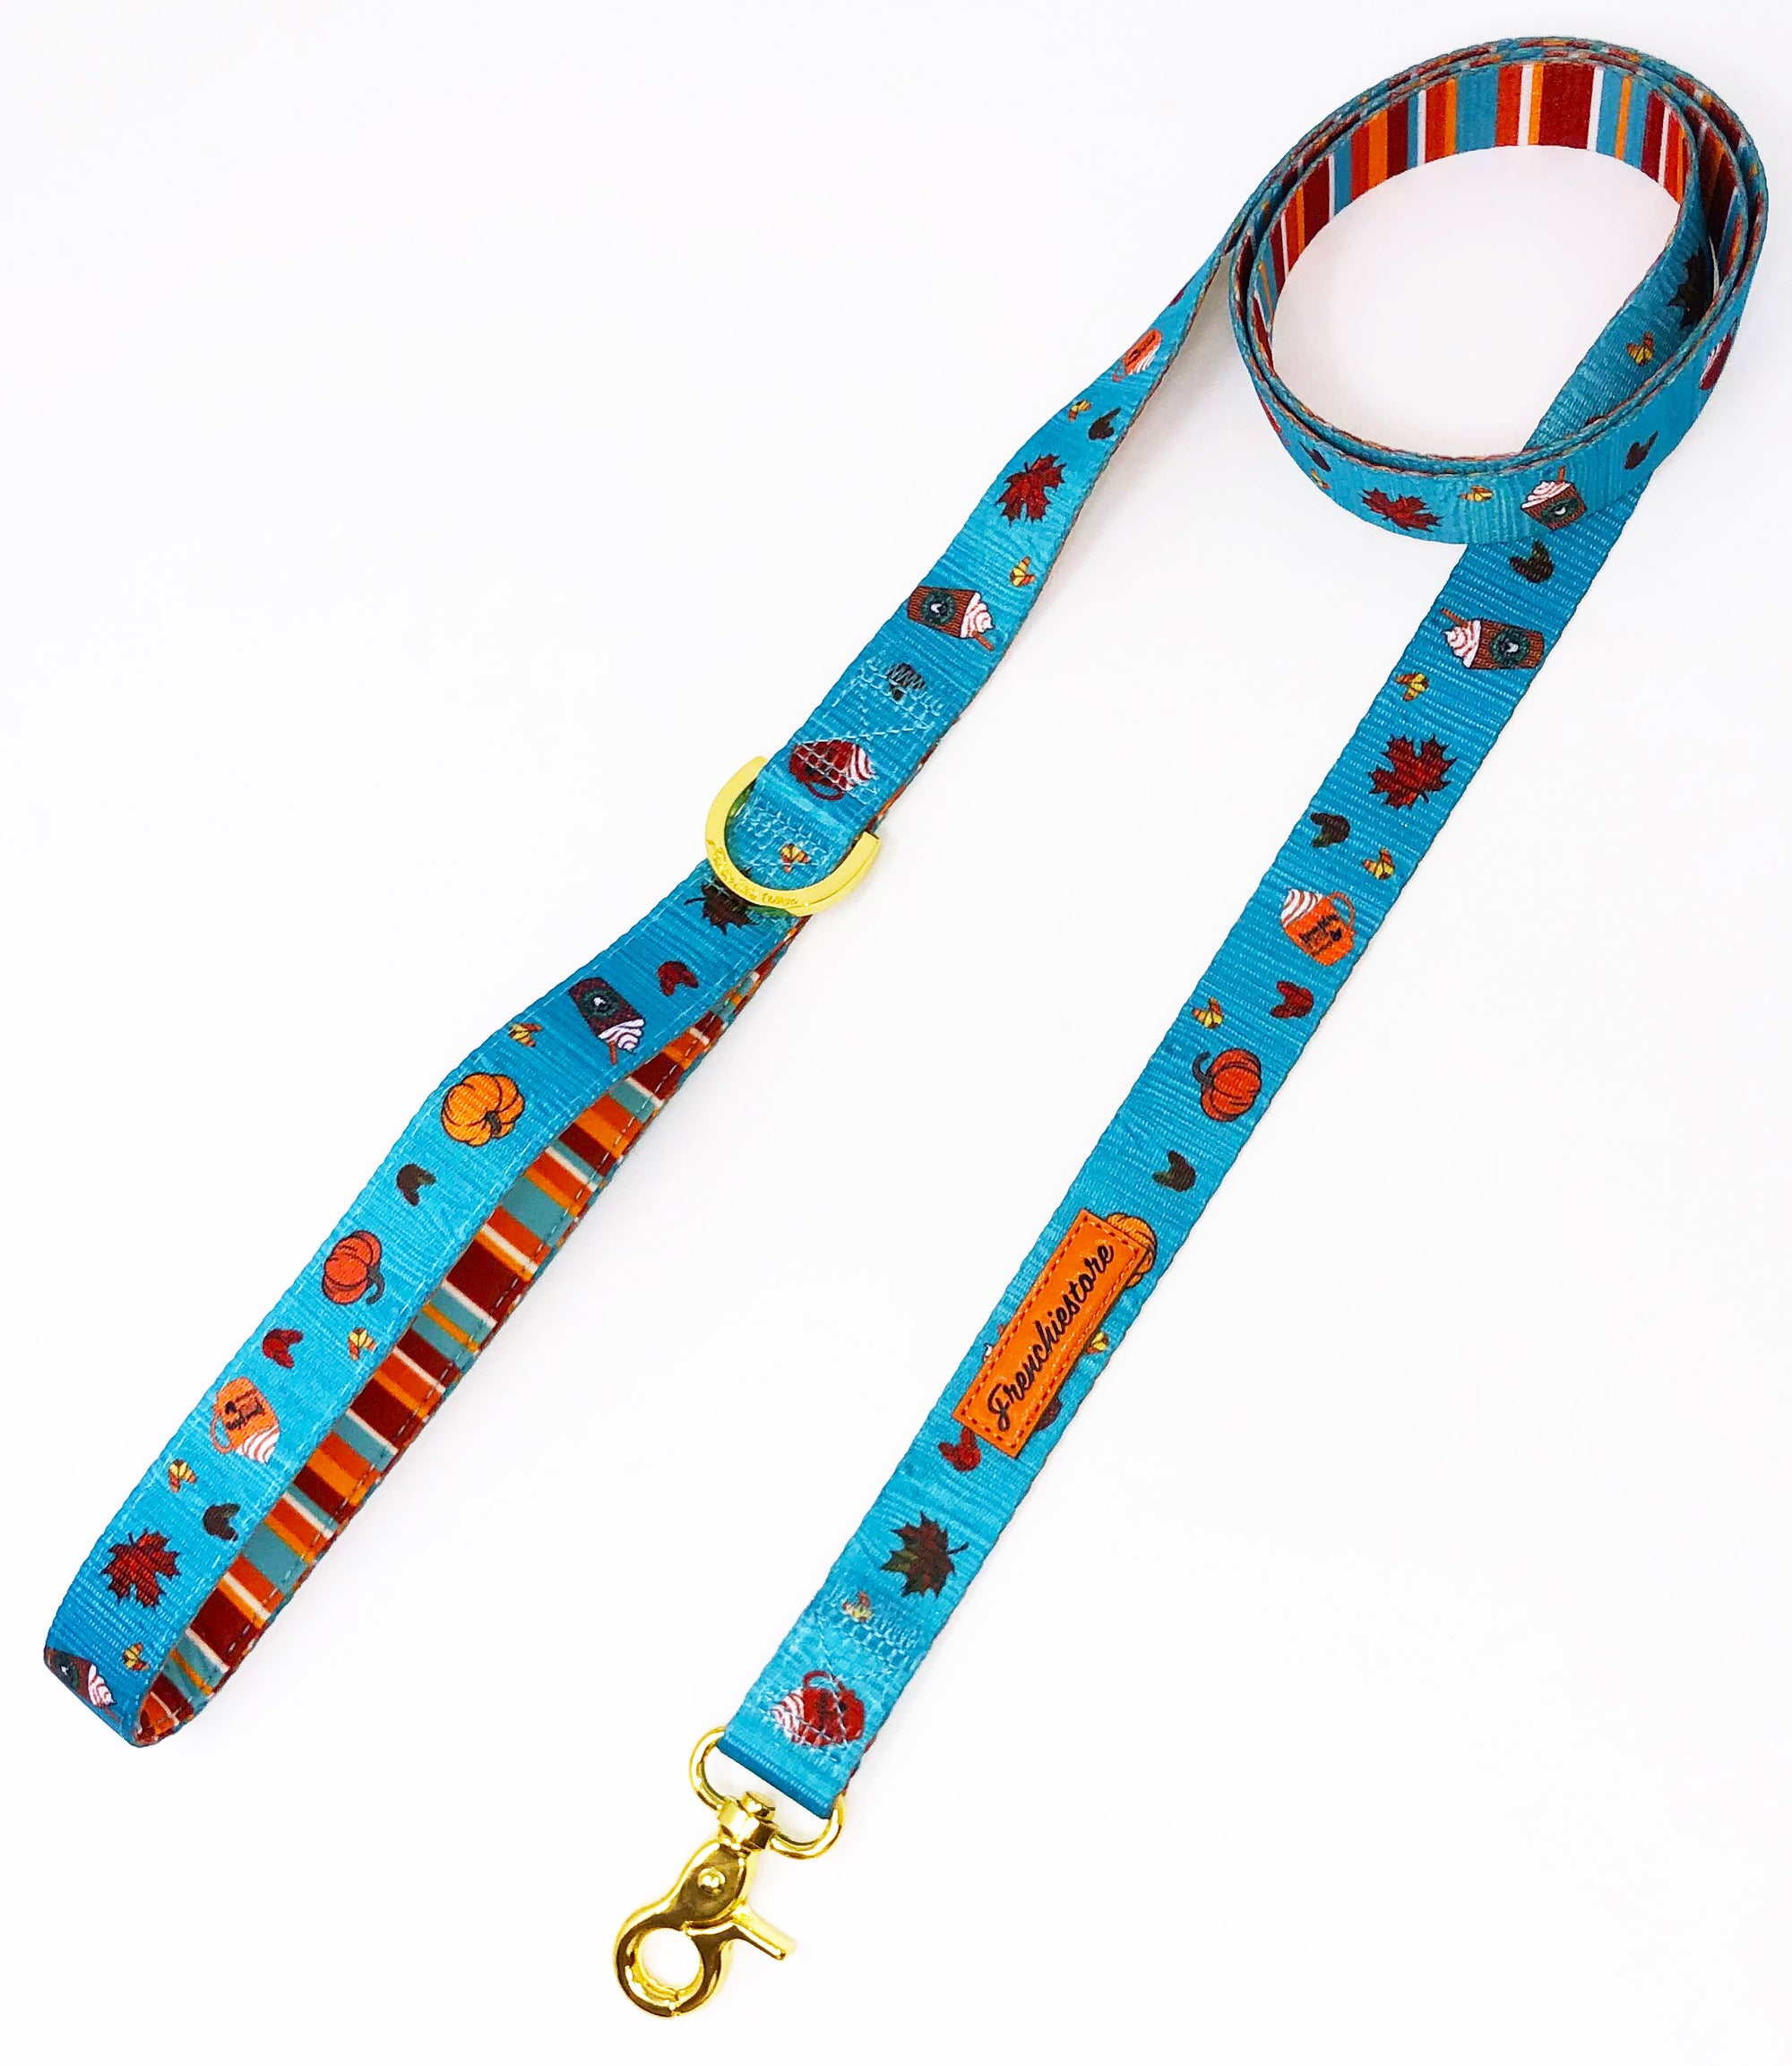 Frenchiestore Luxury Leash | Pumpkin Spice Pupcup, Frenchie Dog, French Bulldog pet products